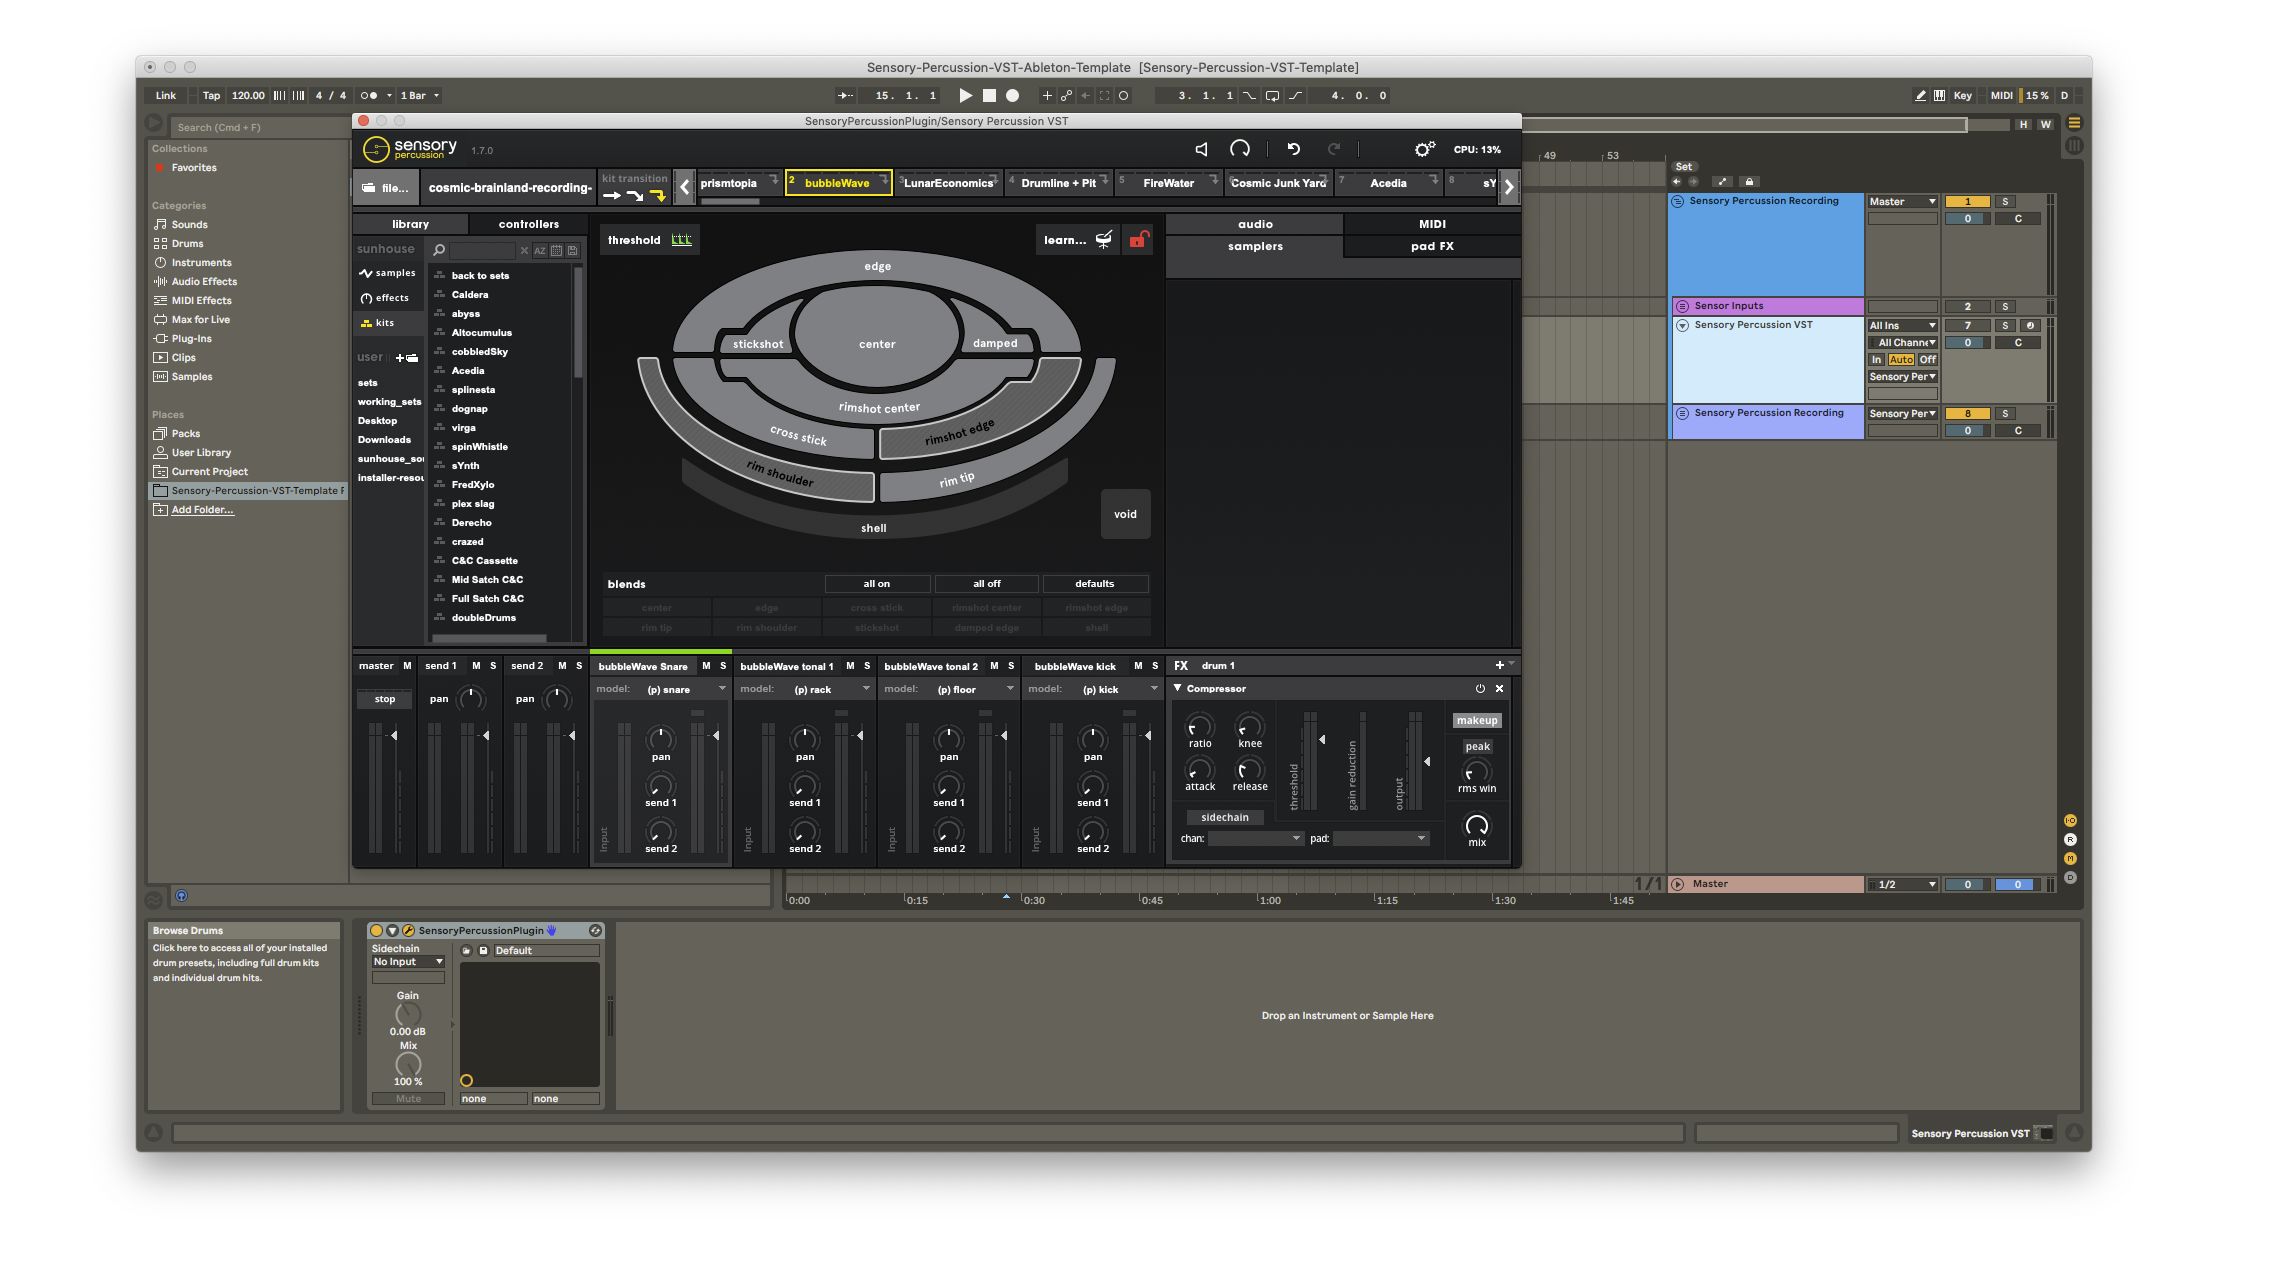 A screenshot of Ableton with the SP Plugin loaded